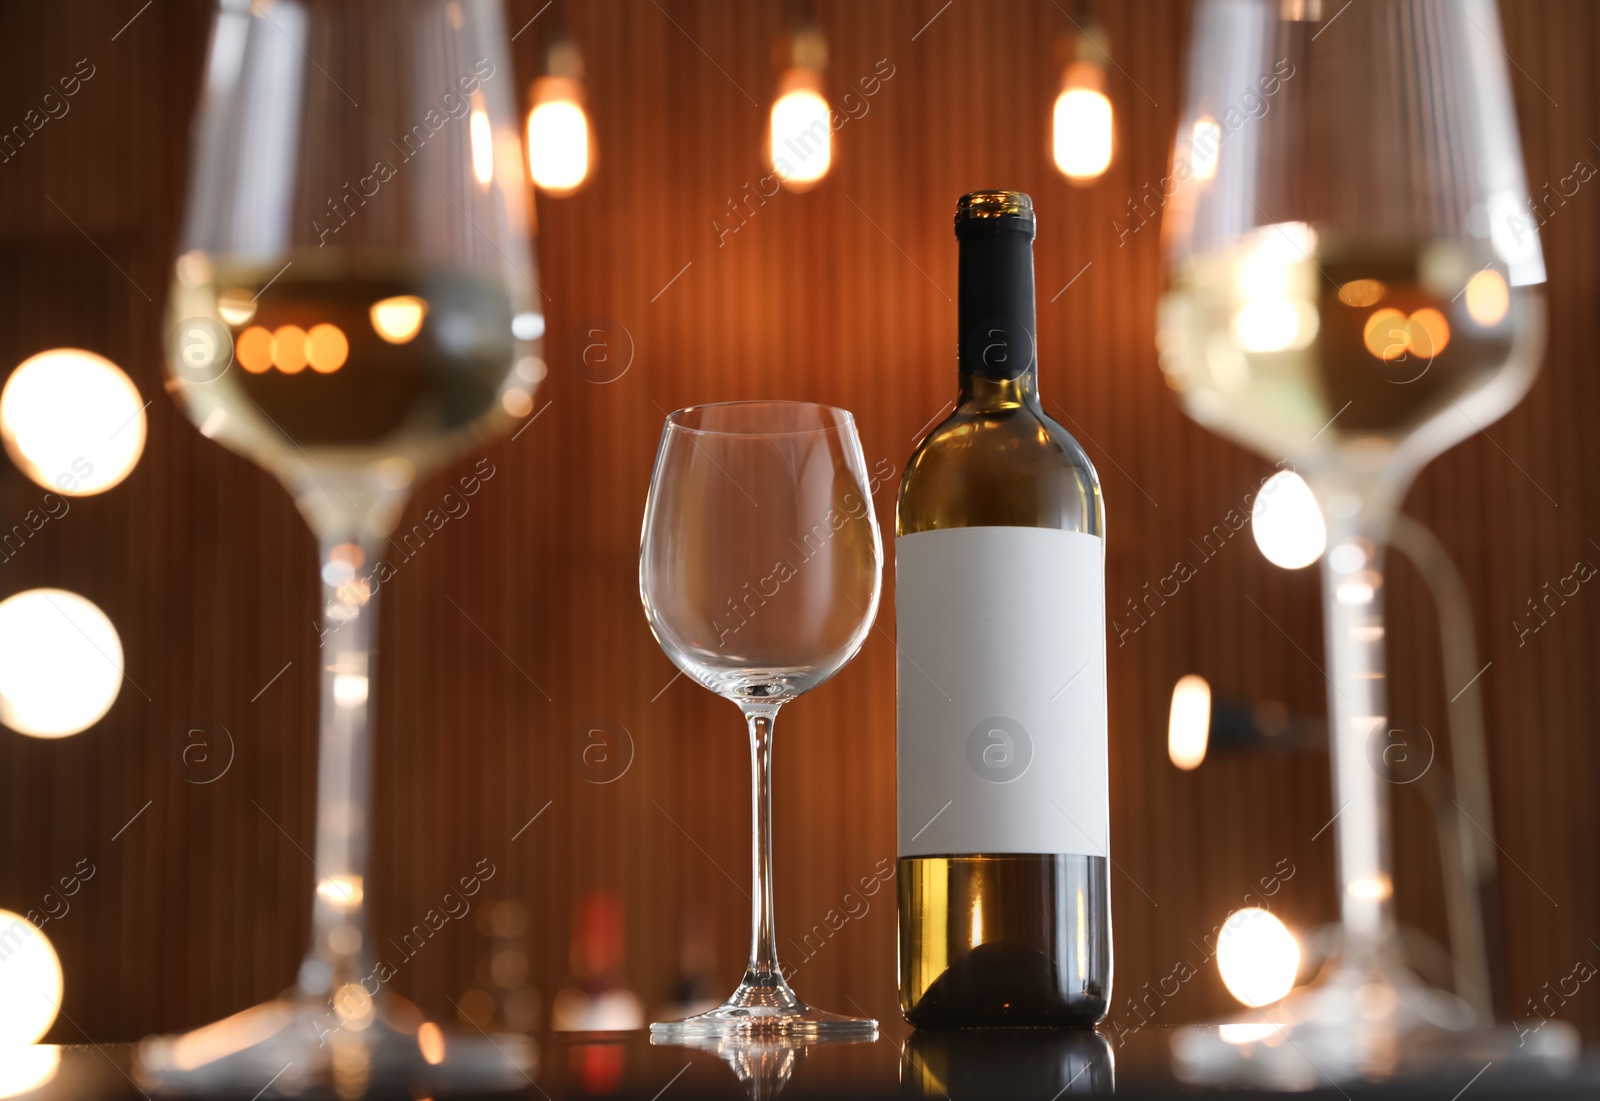 Photo of Bottle of wine and empty glass on table against blurred background. Space for text